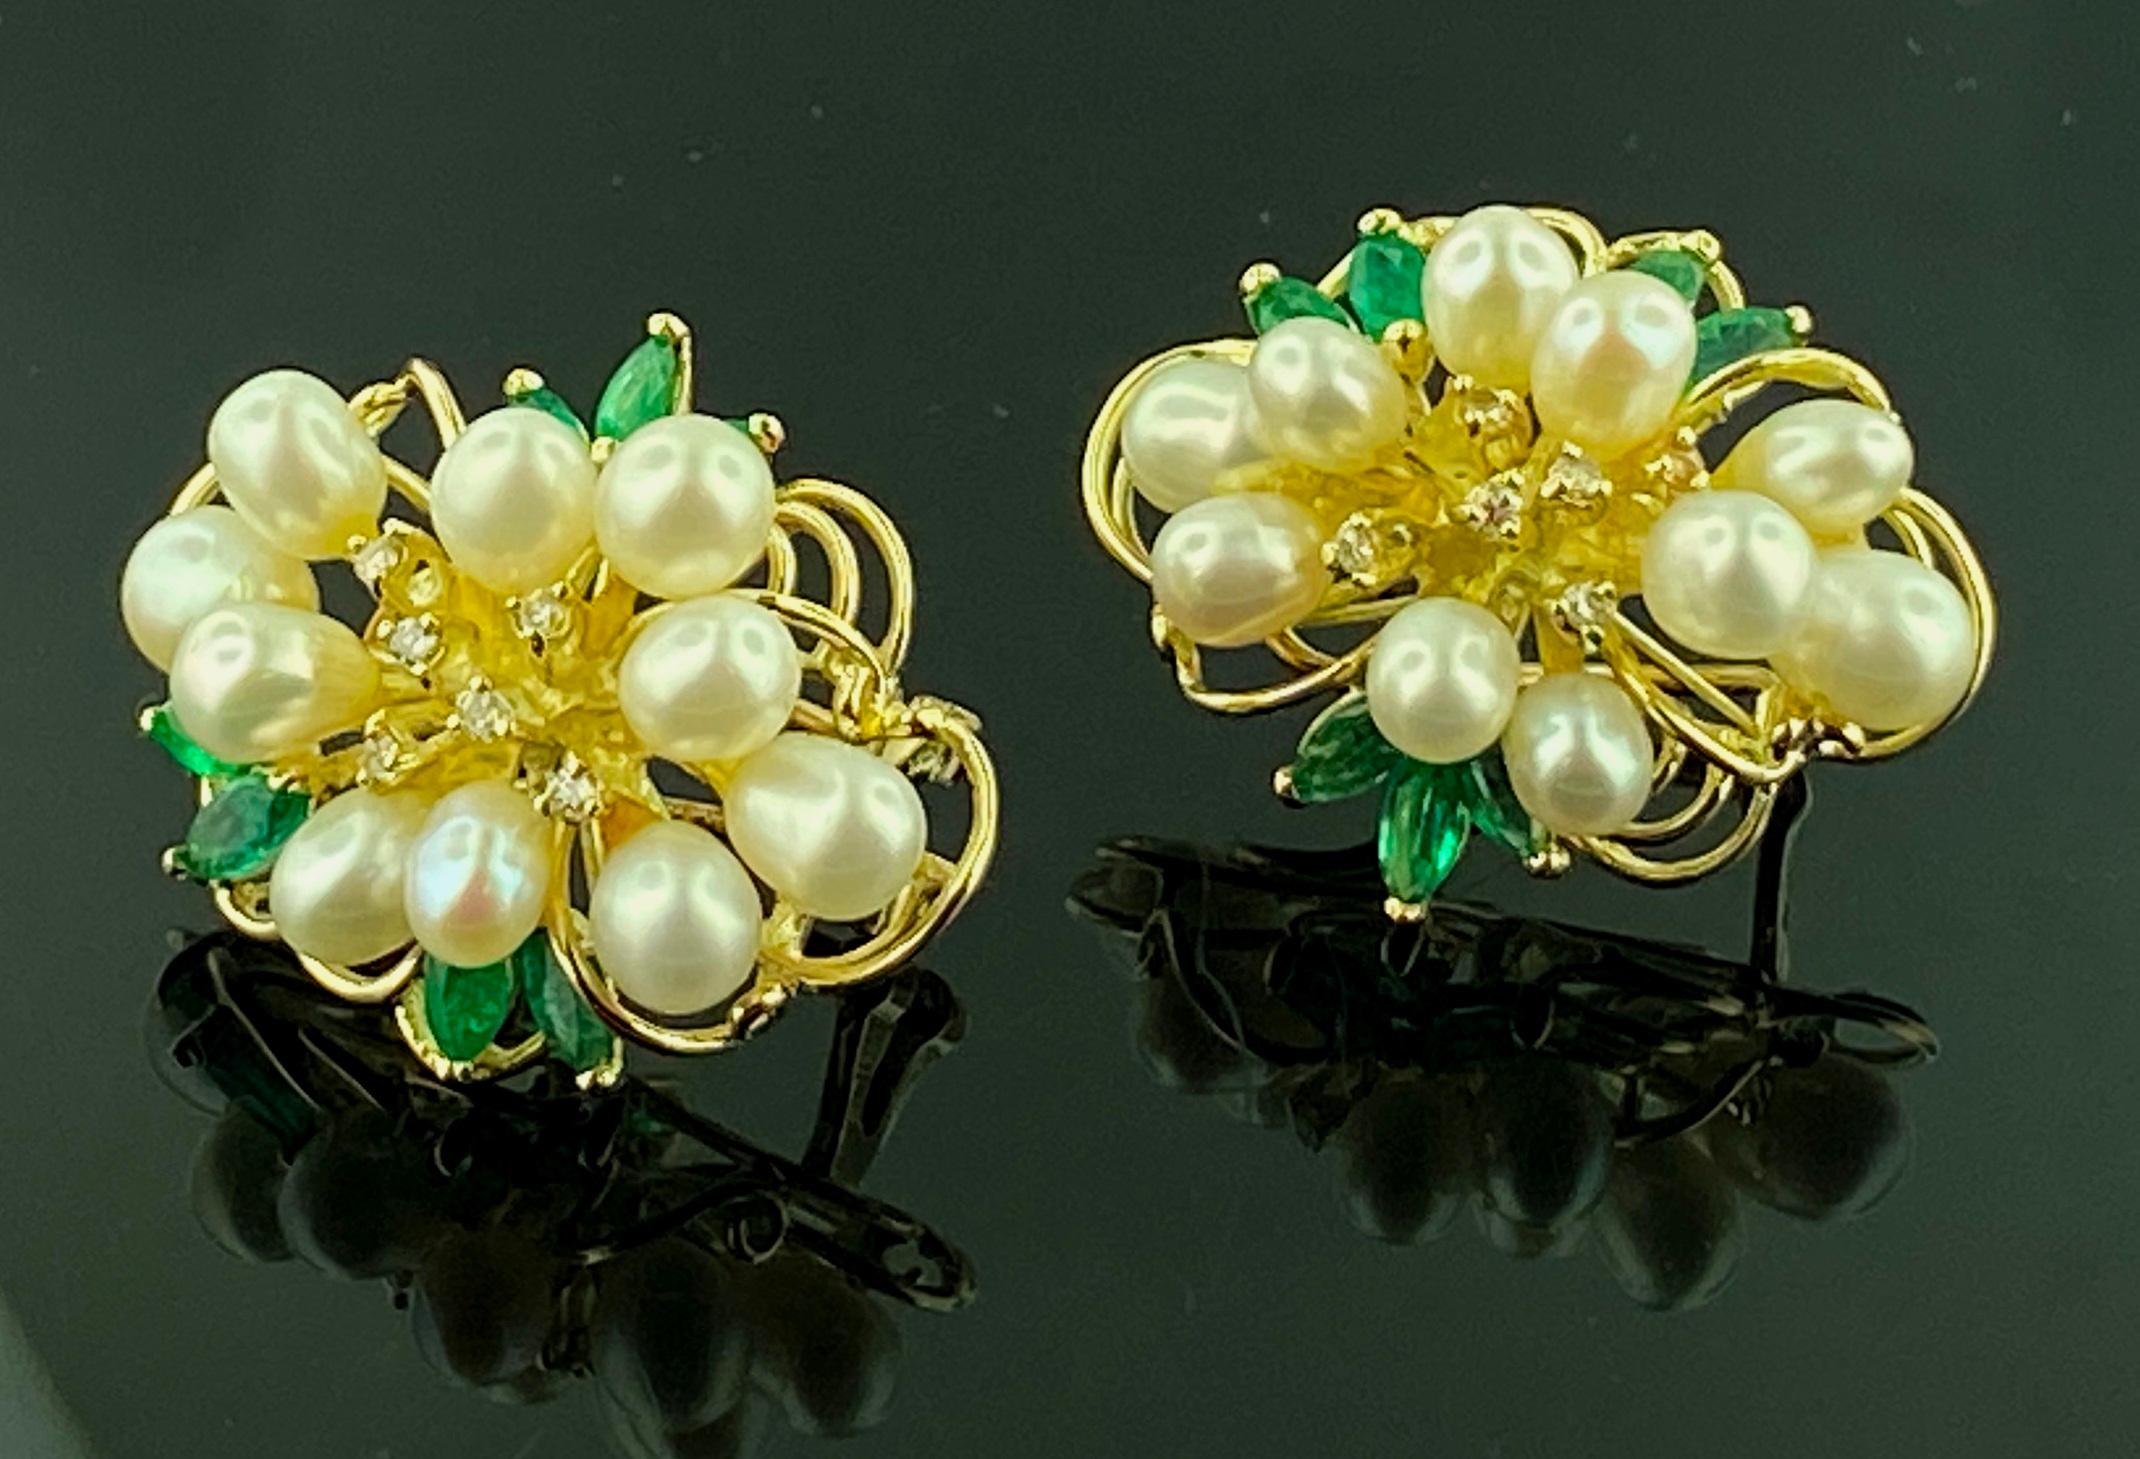 Set in 14 karat Yellow gold, weighing 10 grams, are a total of 20 Freshwater Pearls, with 12 Round Brilliant cut diamonds, weighing 0.05 carats and 14 Marquise cut Emeralds weighing 1.33 carats.